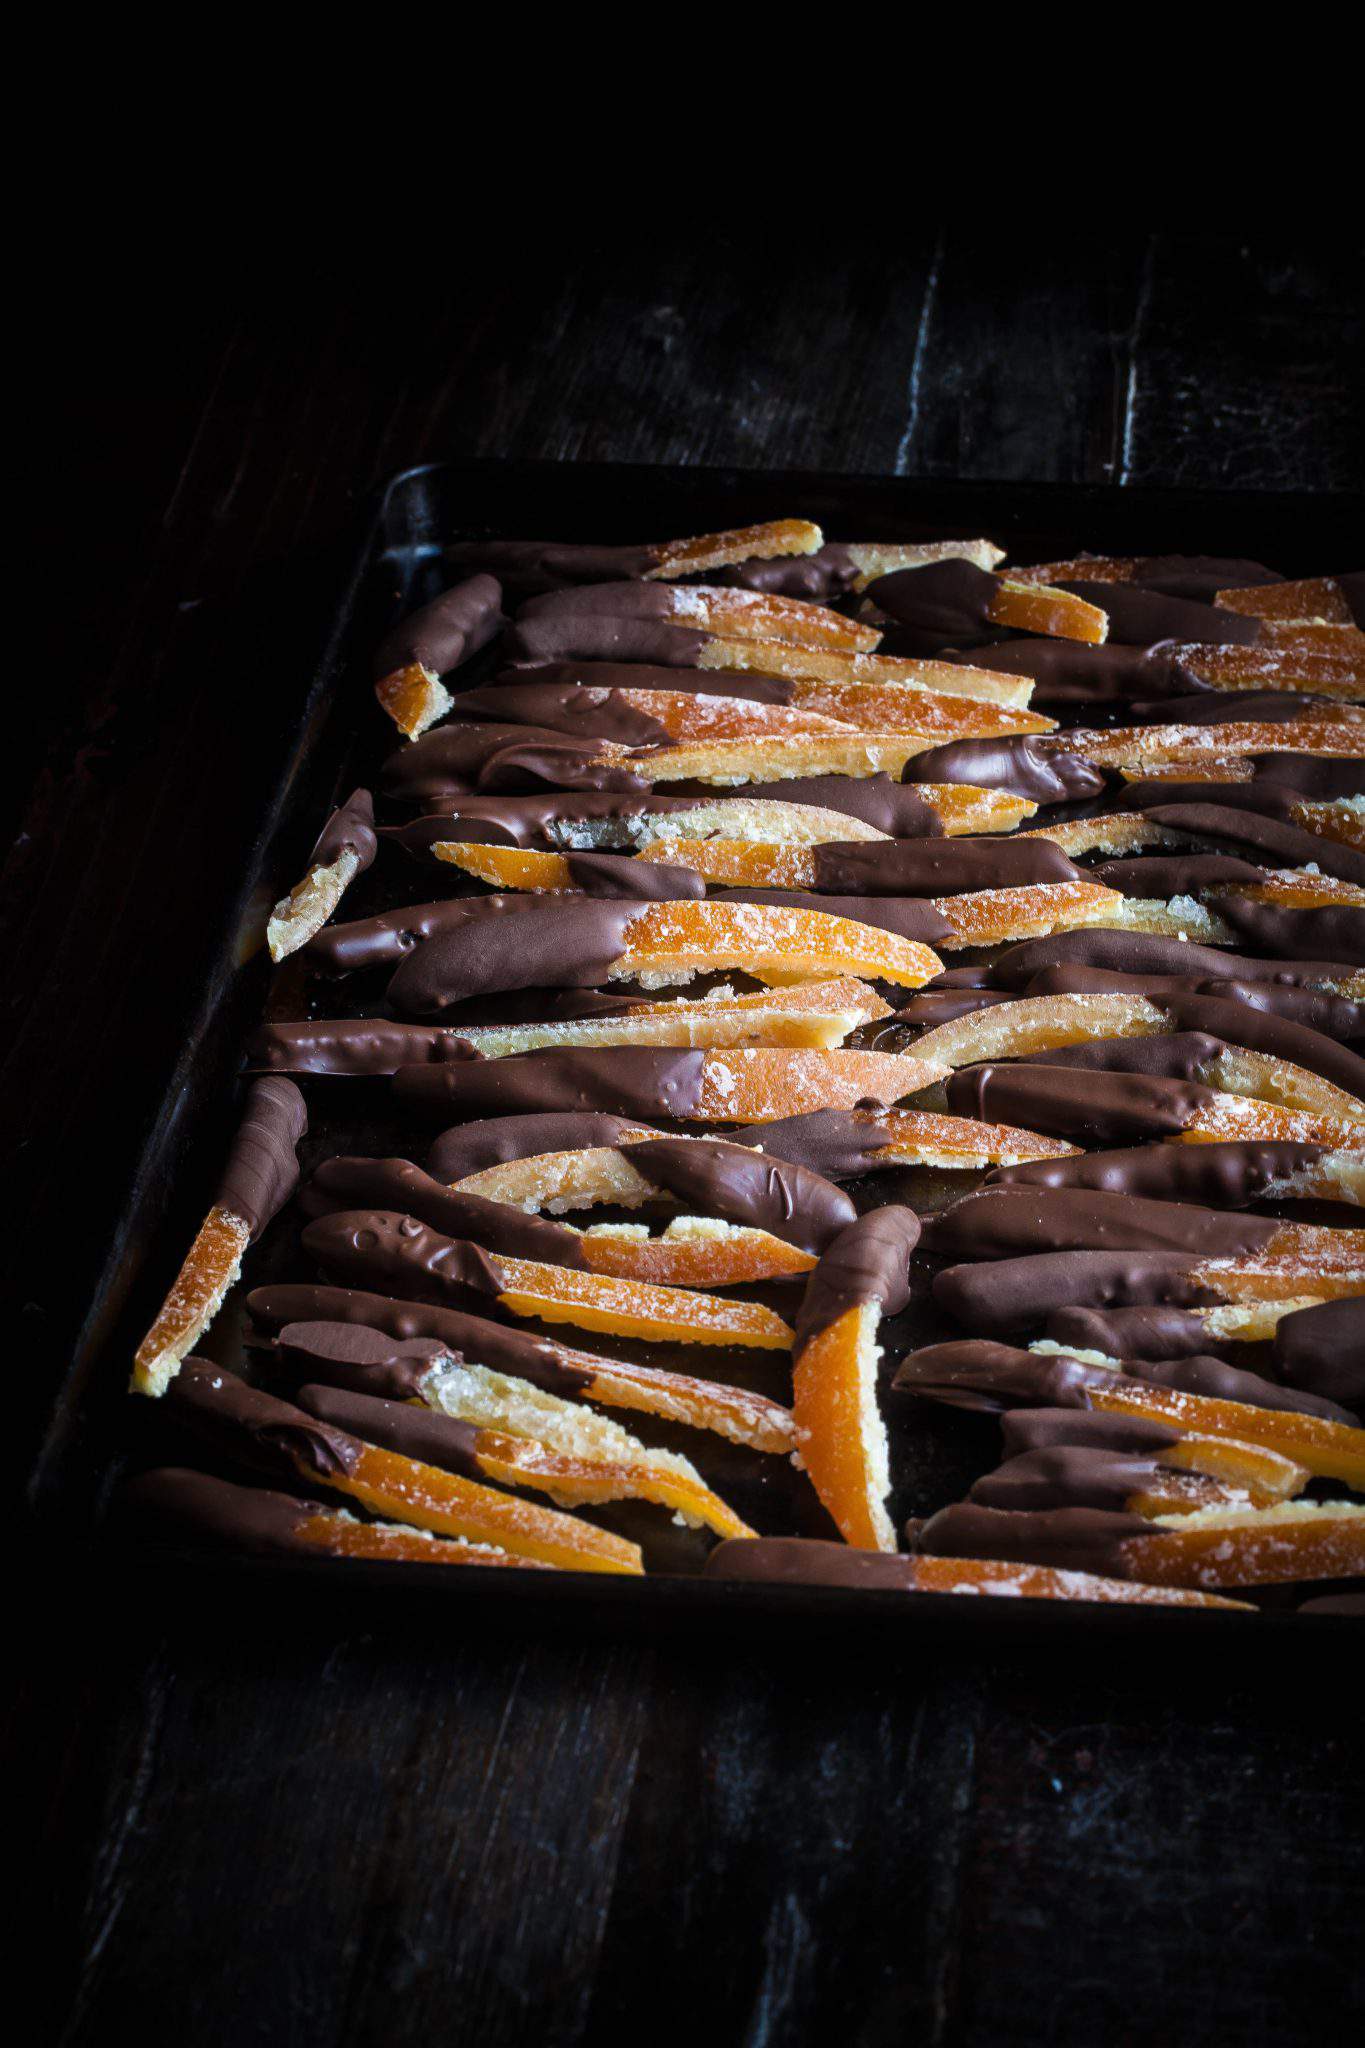 candied orange slices tray